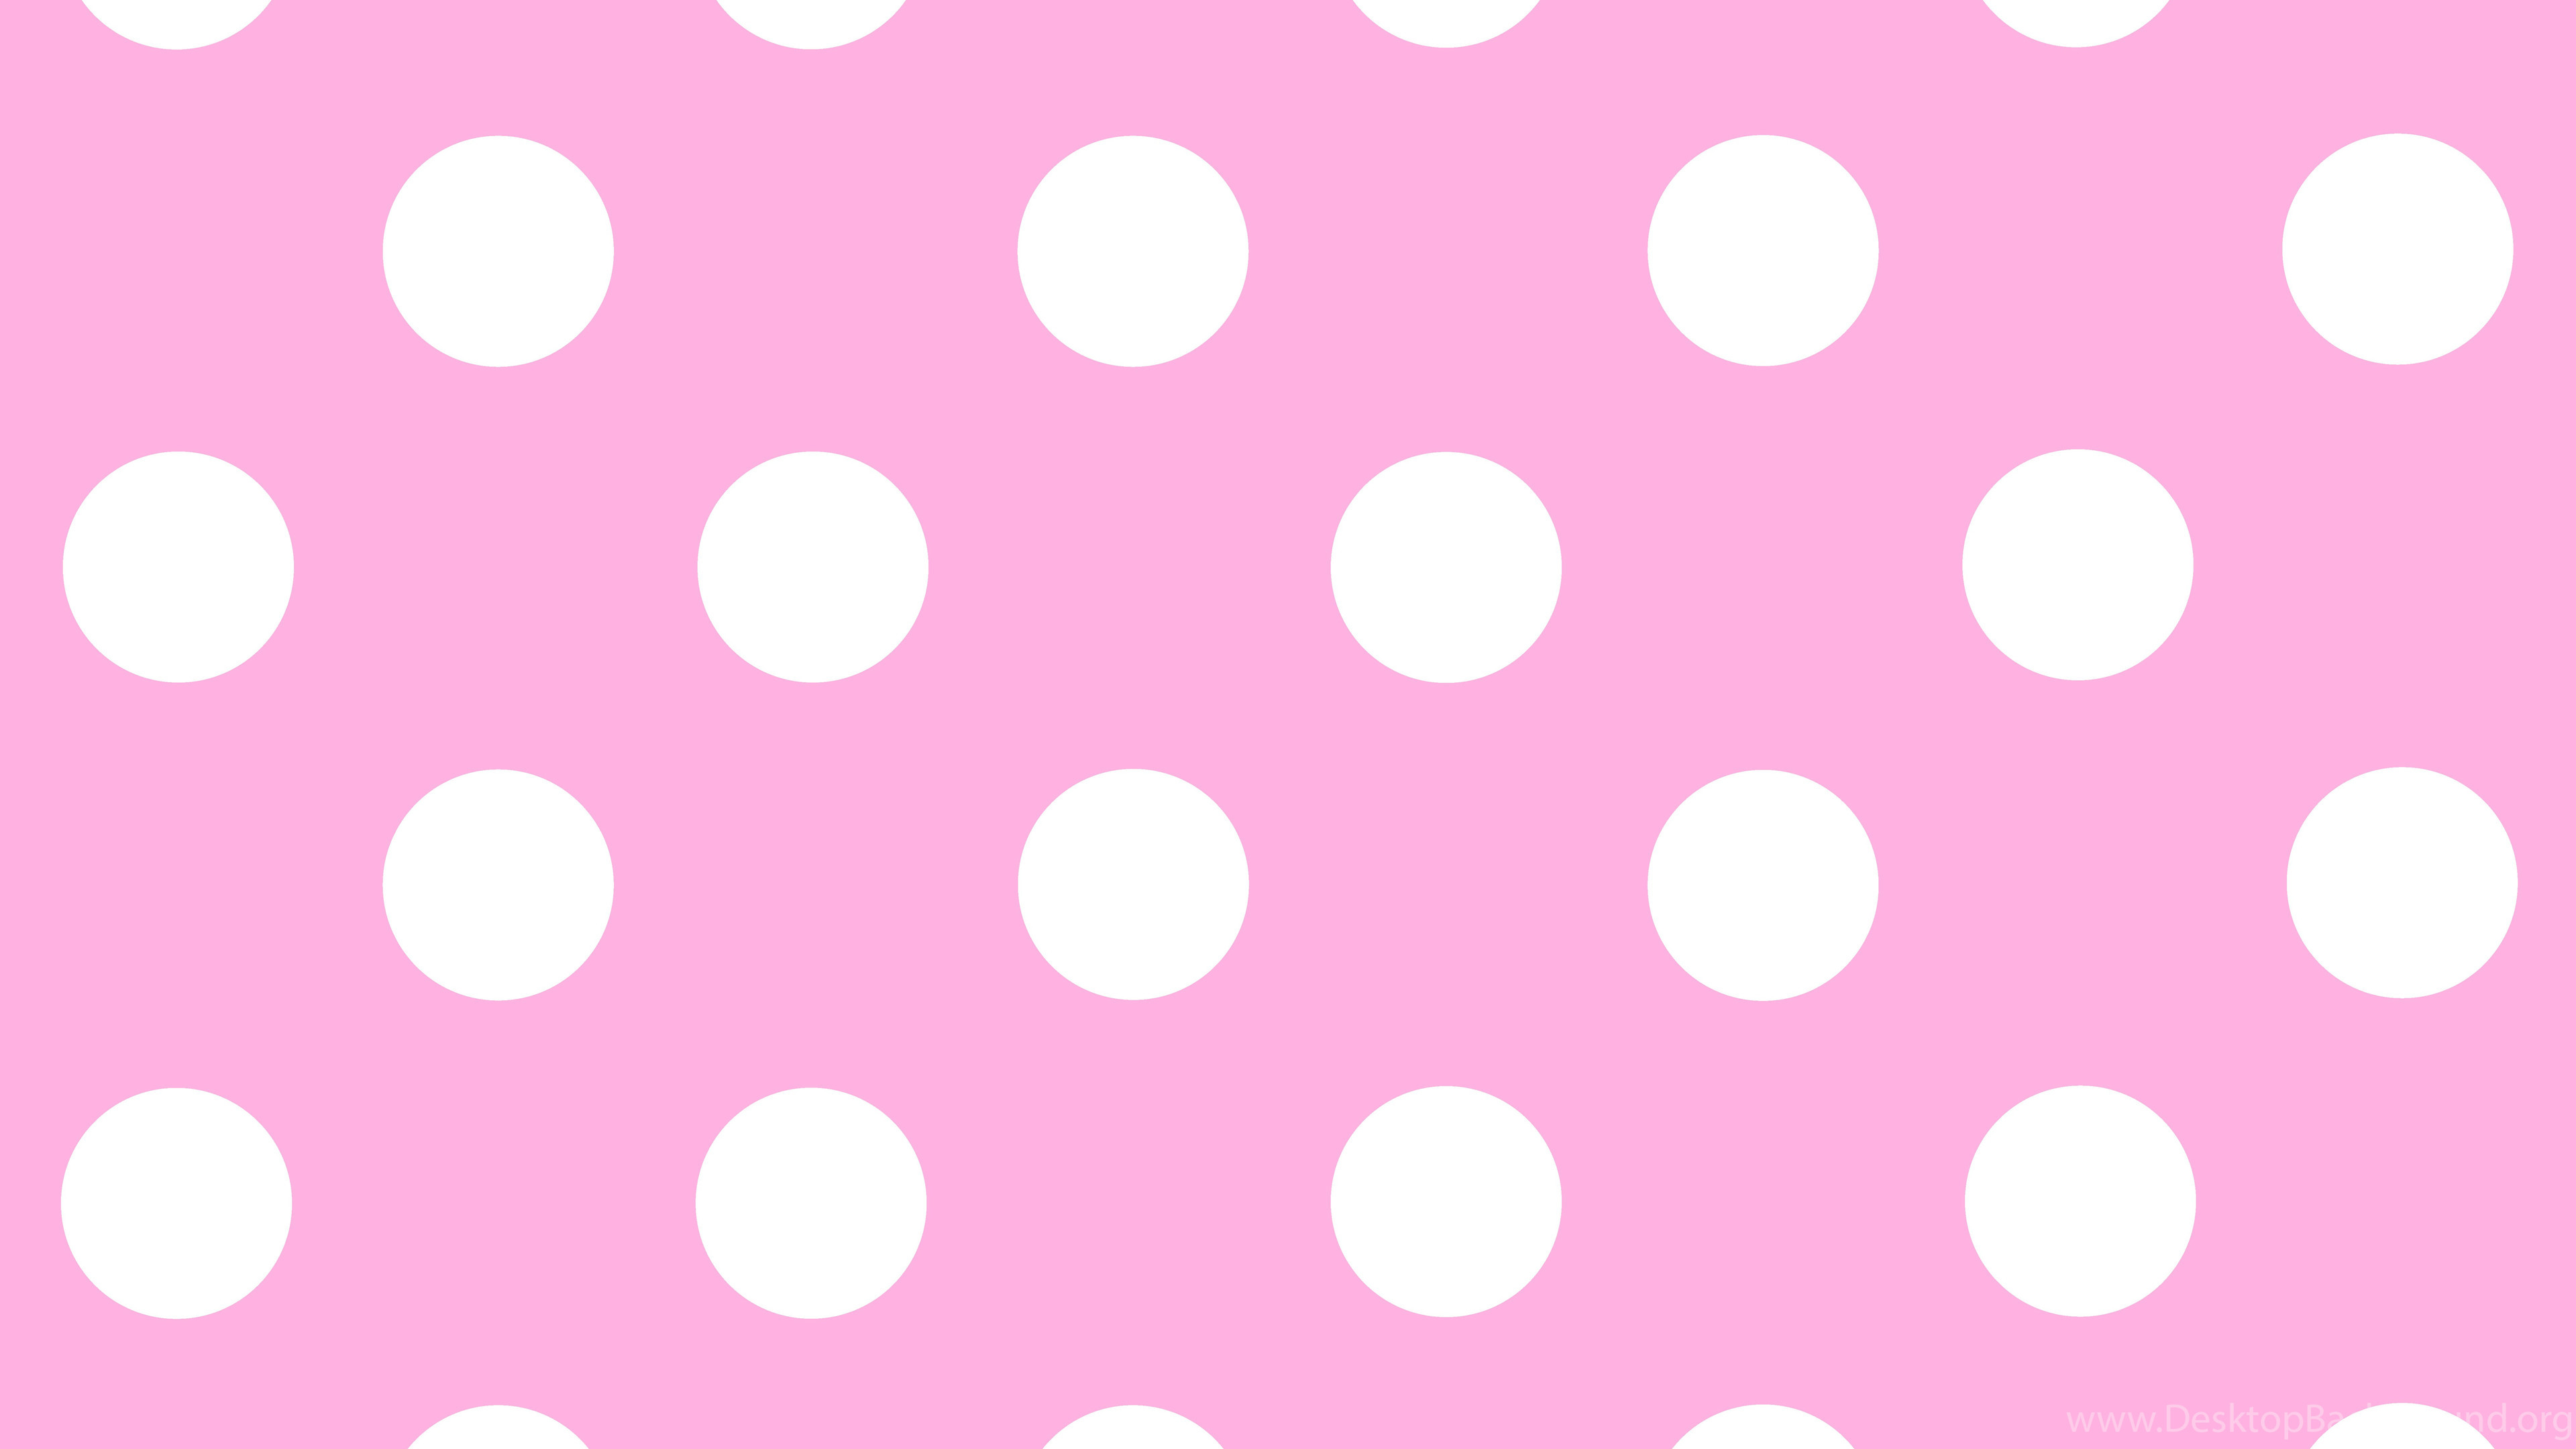 3840x2160 Pink and White Dots Wallpaper New Pink and White Polka Dot Wallpapers  Wallpapers Hd Wide